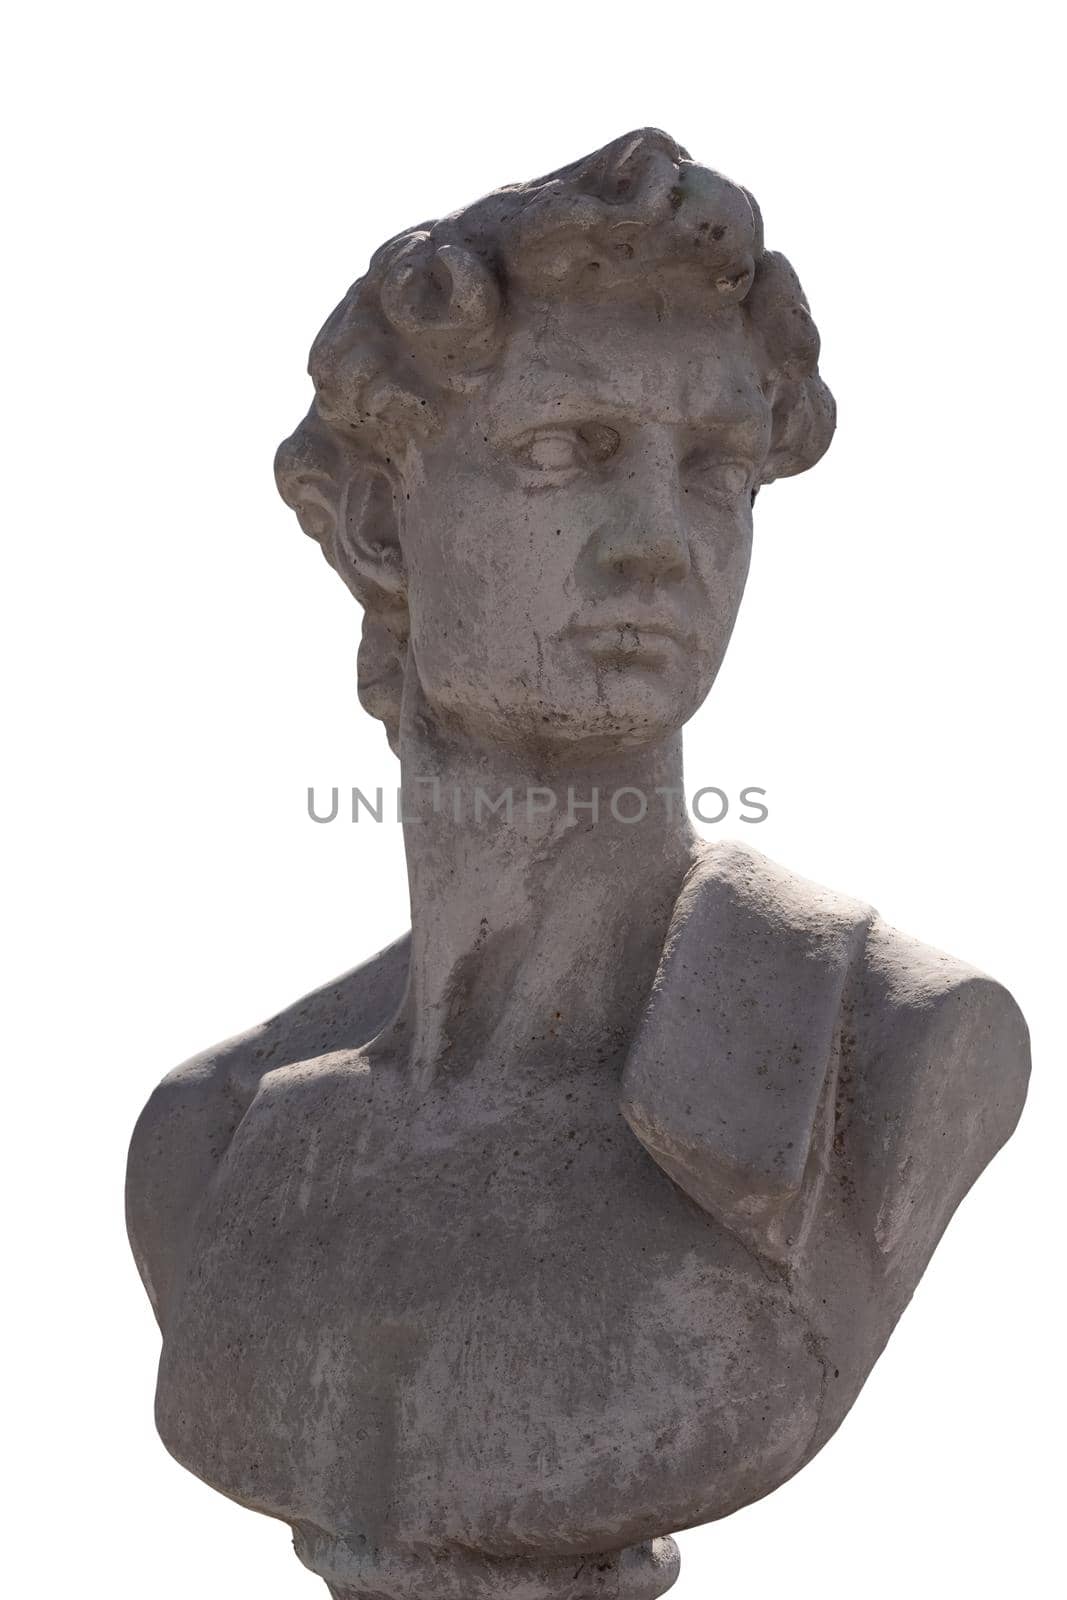 Close up of ancient stone sculpture of man's bust on white background by Wavebreakmedia